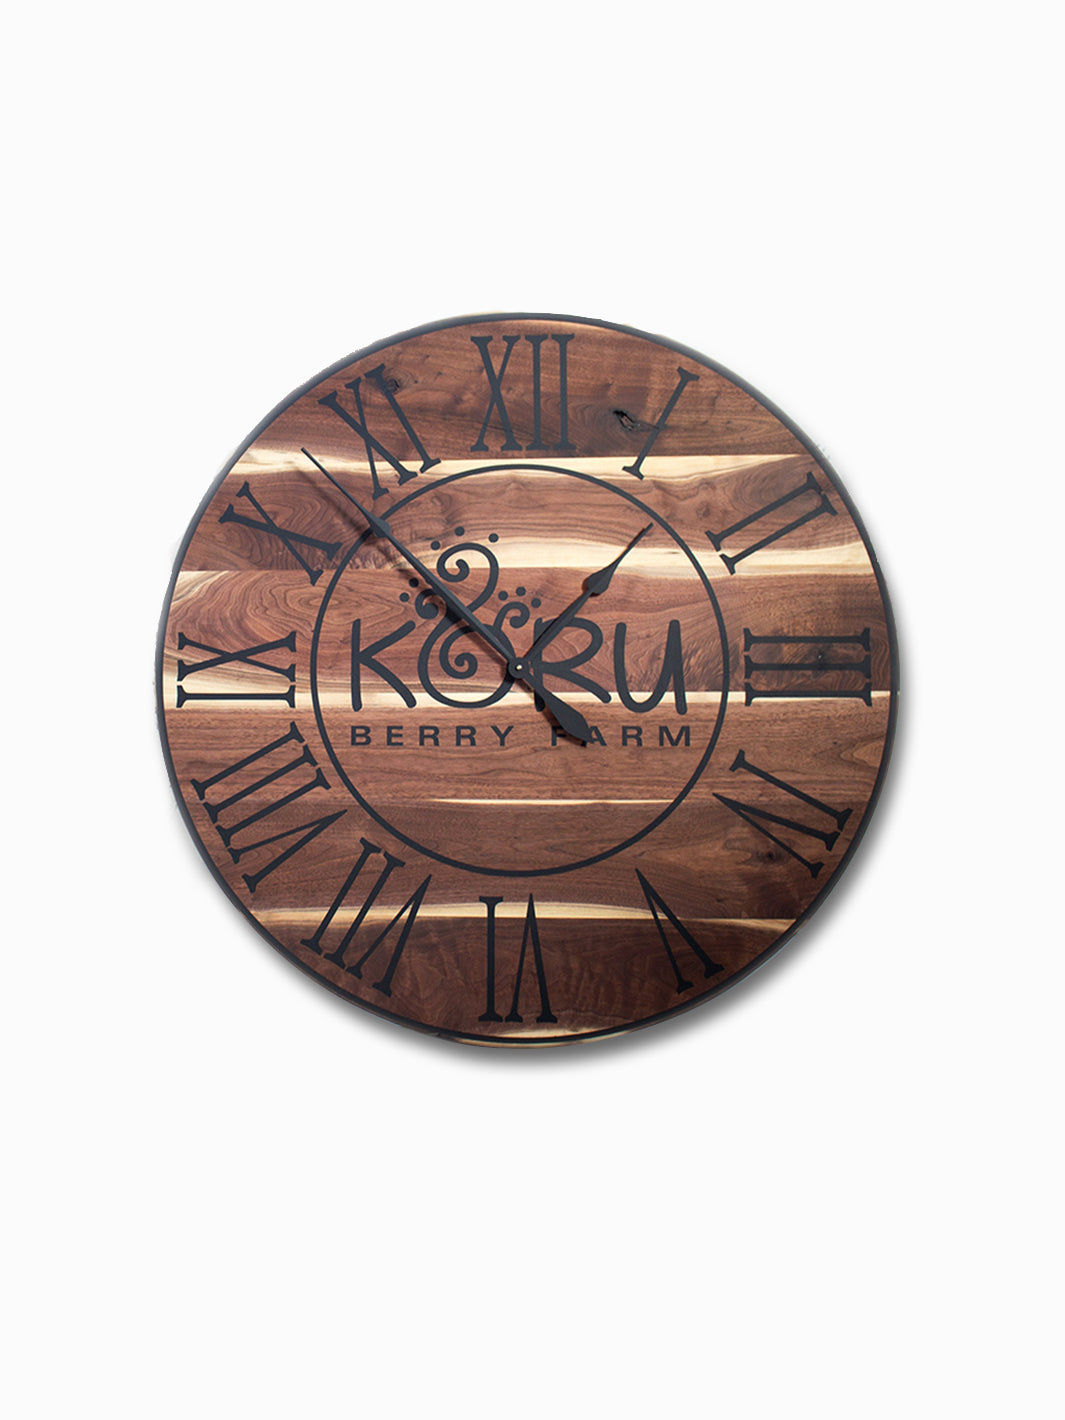 Live Edge Black Walnut Oversized Wall Clock with Black Lines and Roman Numerals Earthly Comfort Clocks 636